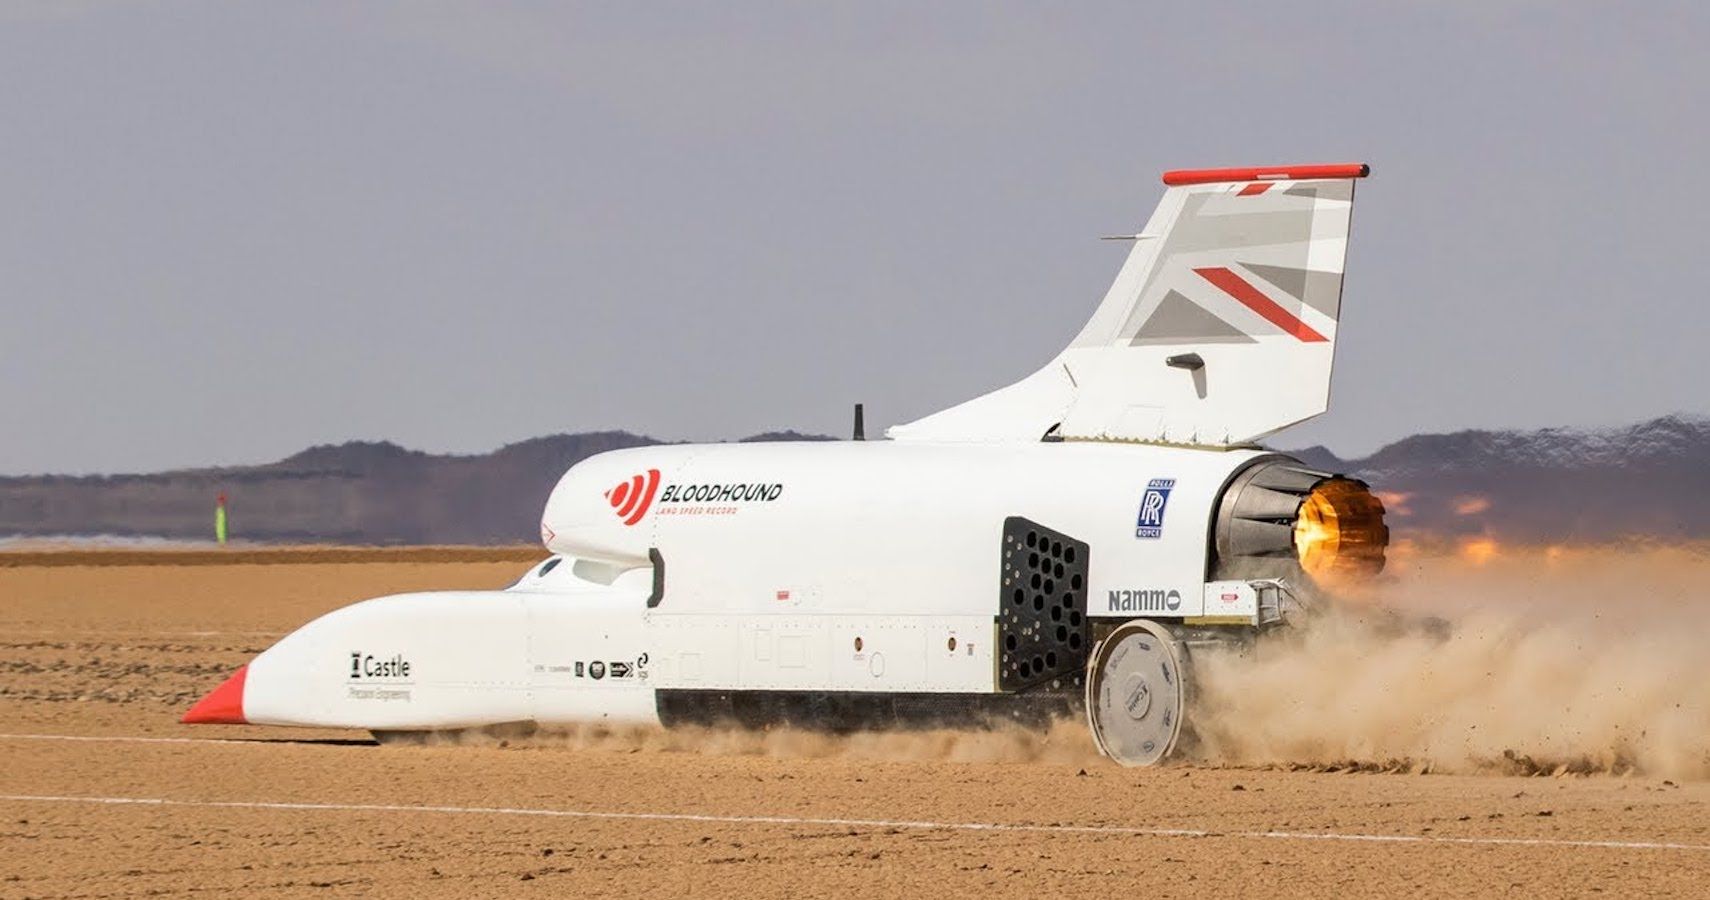 Ever Wanted To Own A Land Speeder? The Bloodhound Is Up For Sale